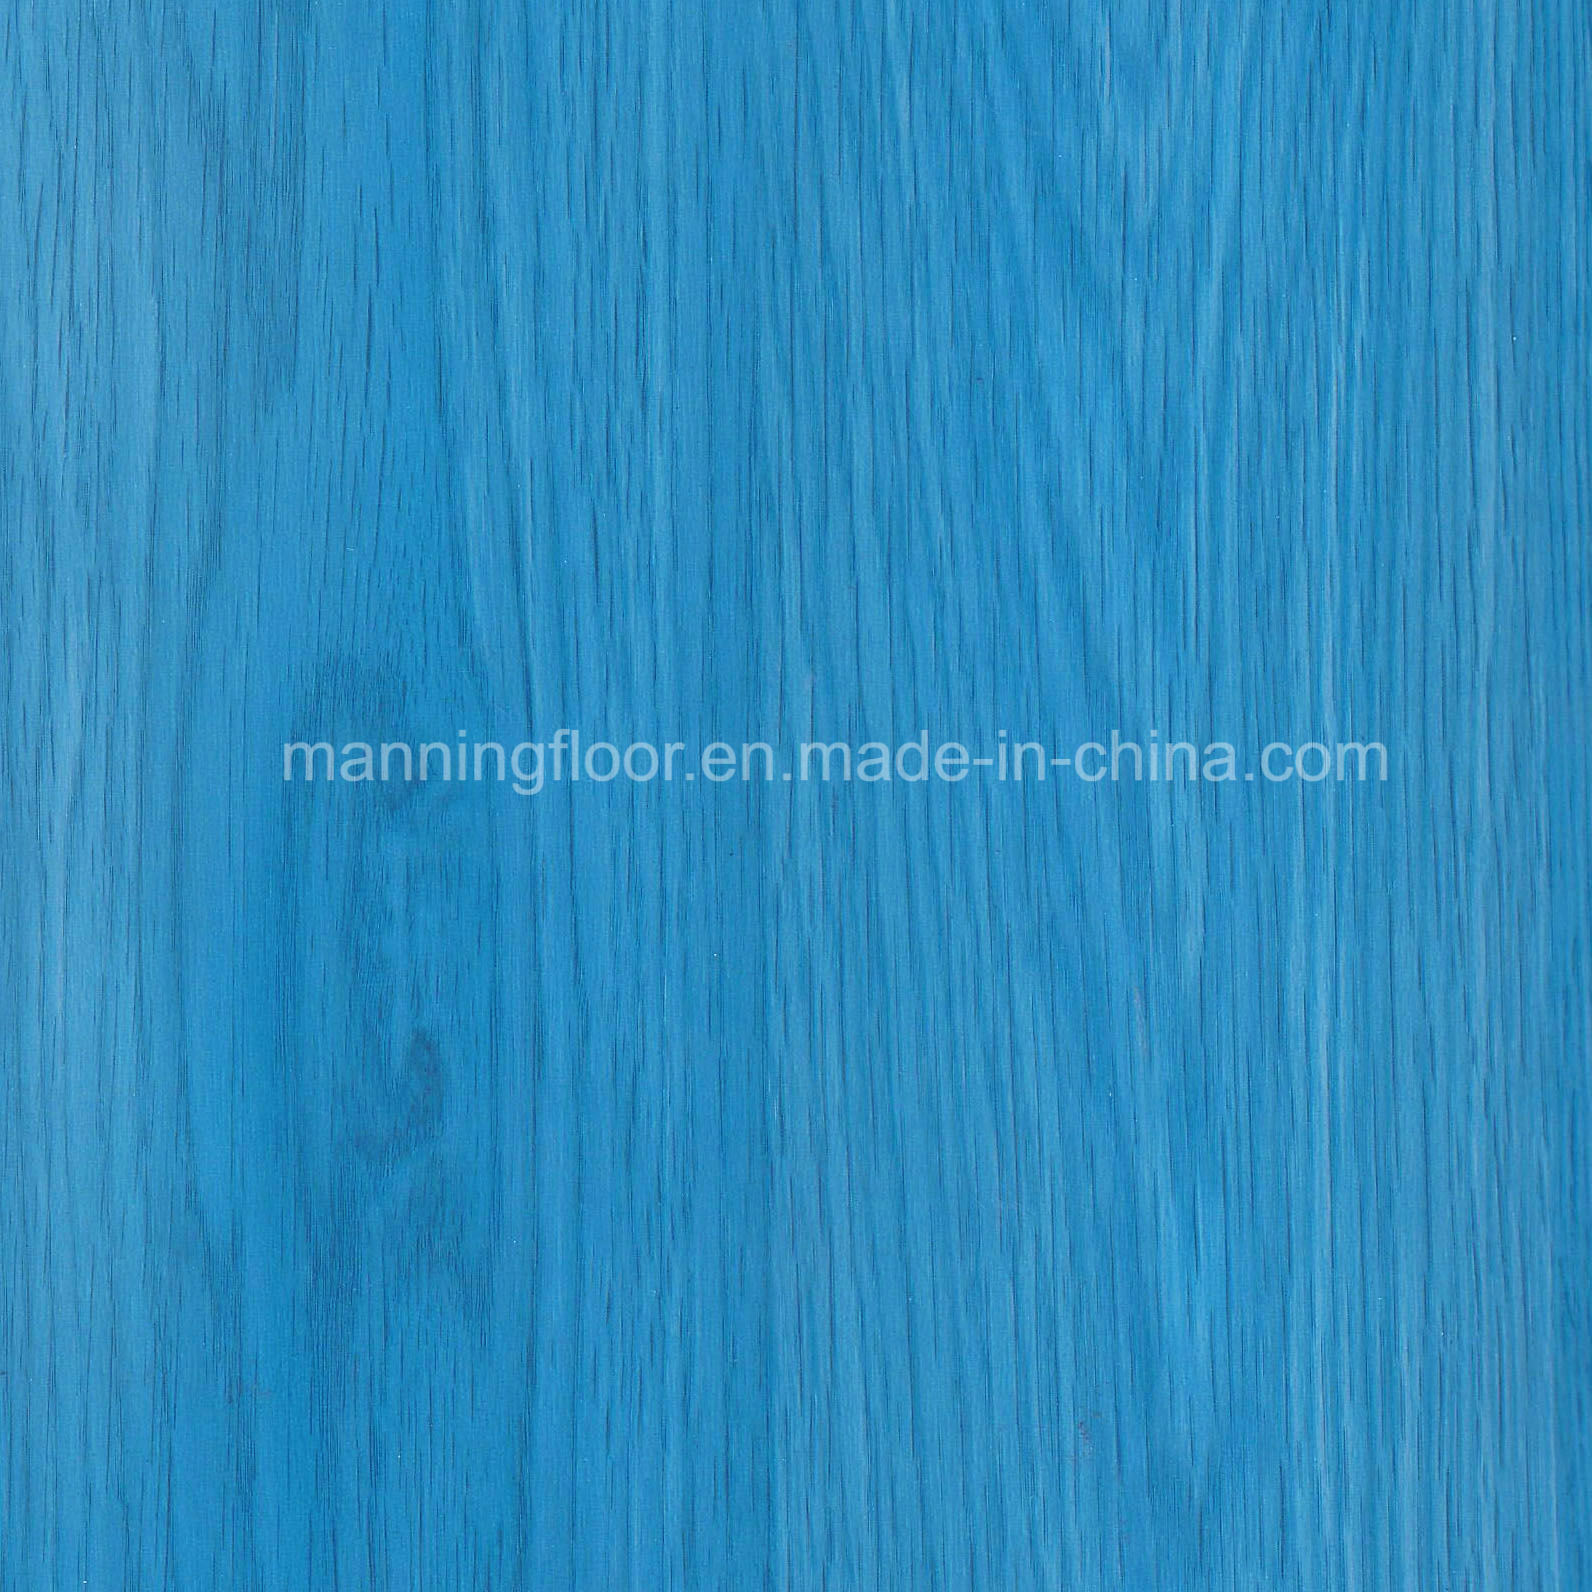 PVC Sports Flooring for Indoor Basketball Wood Pattern-6.5mm Thick Hj6813